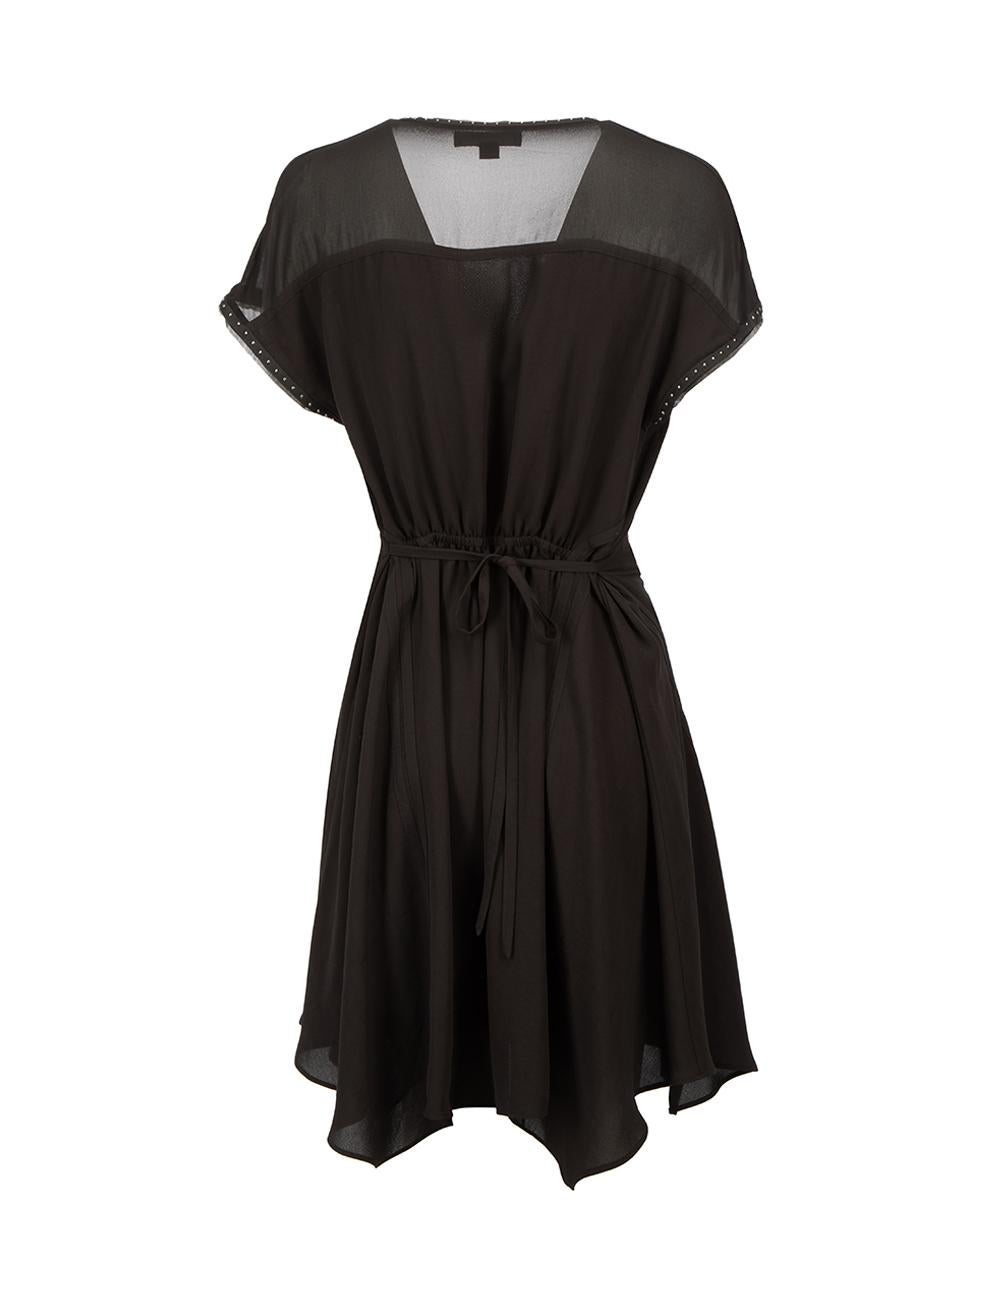 All Saints Black Claria Short Sleeve Mini Dress Size S In Good Condition For Sale In London, GB